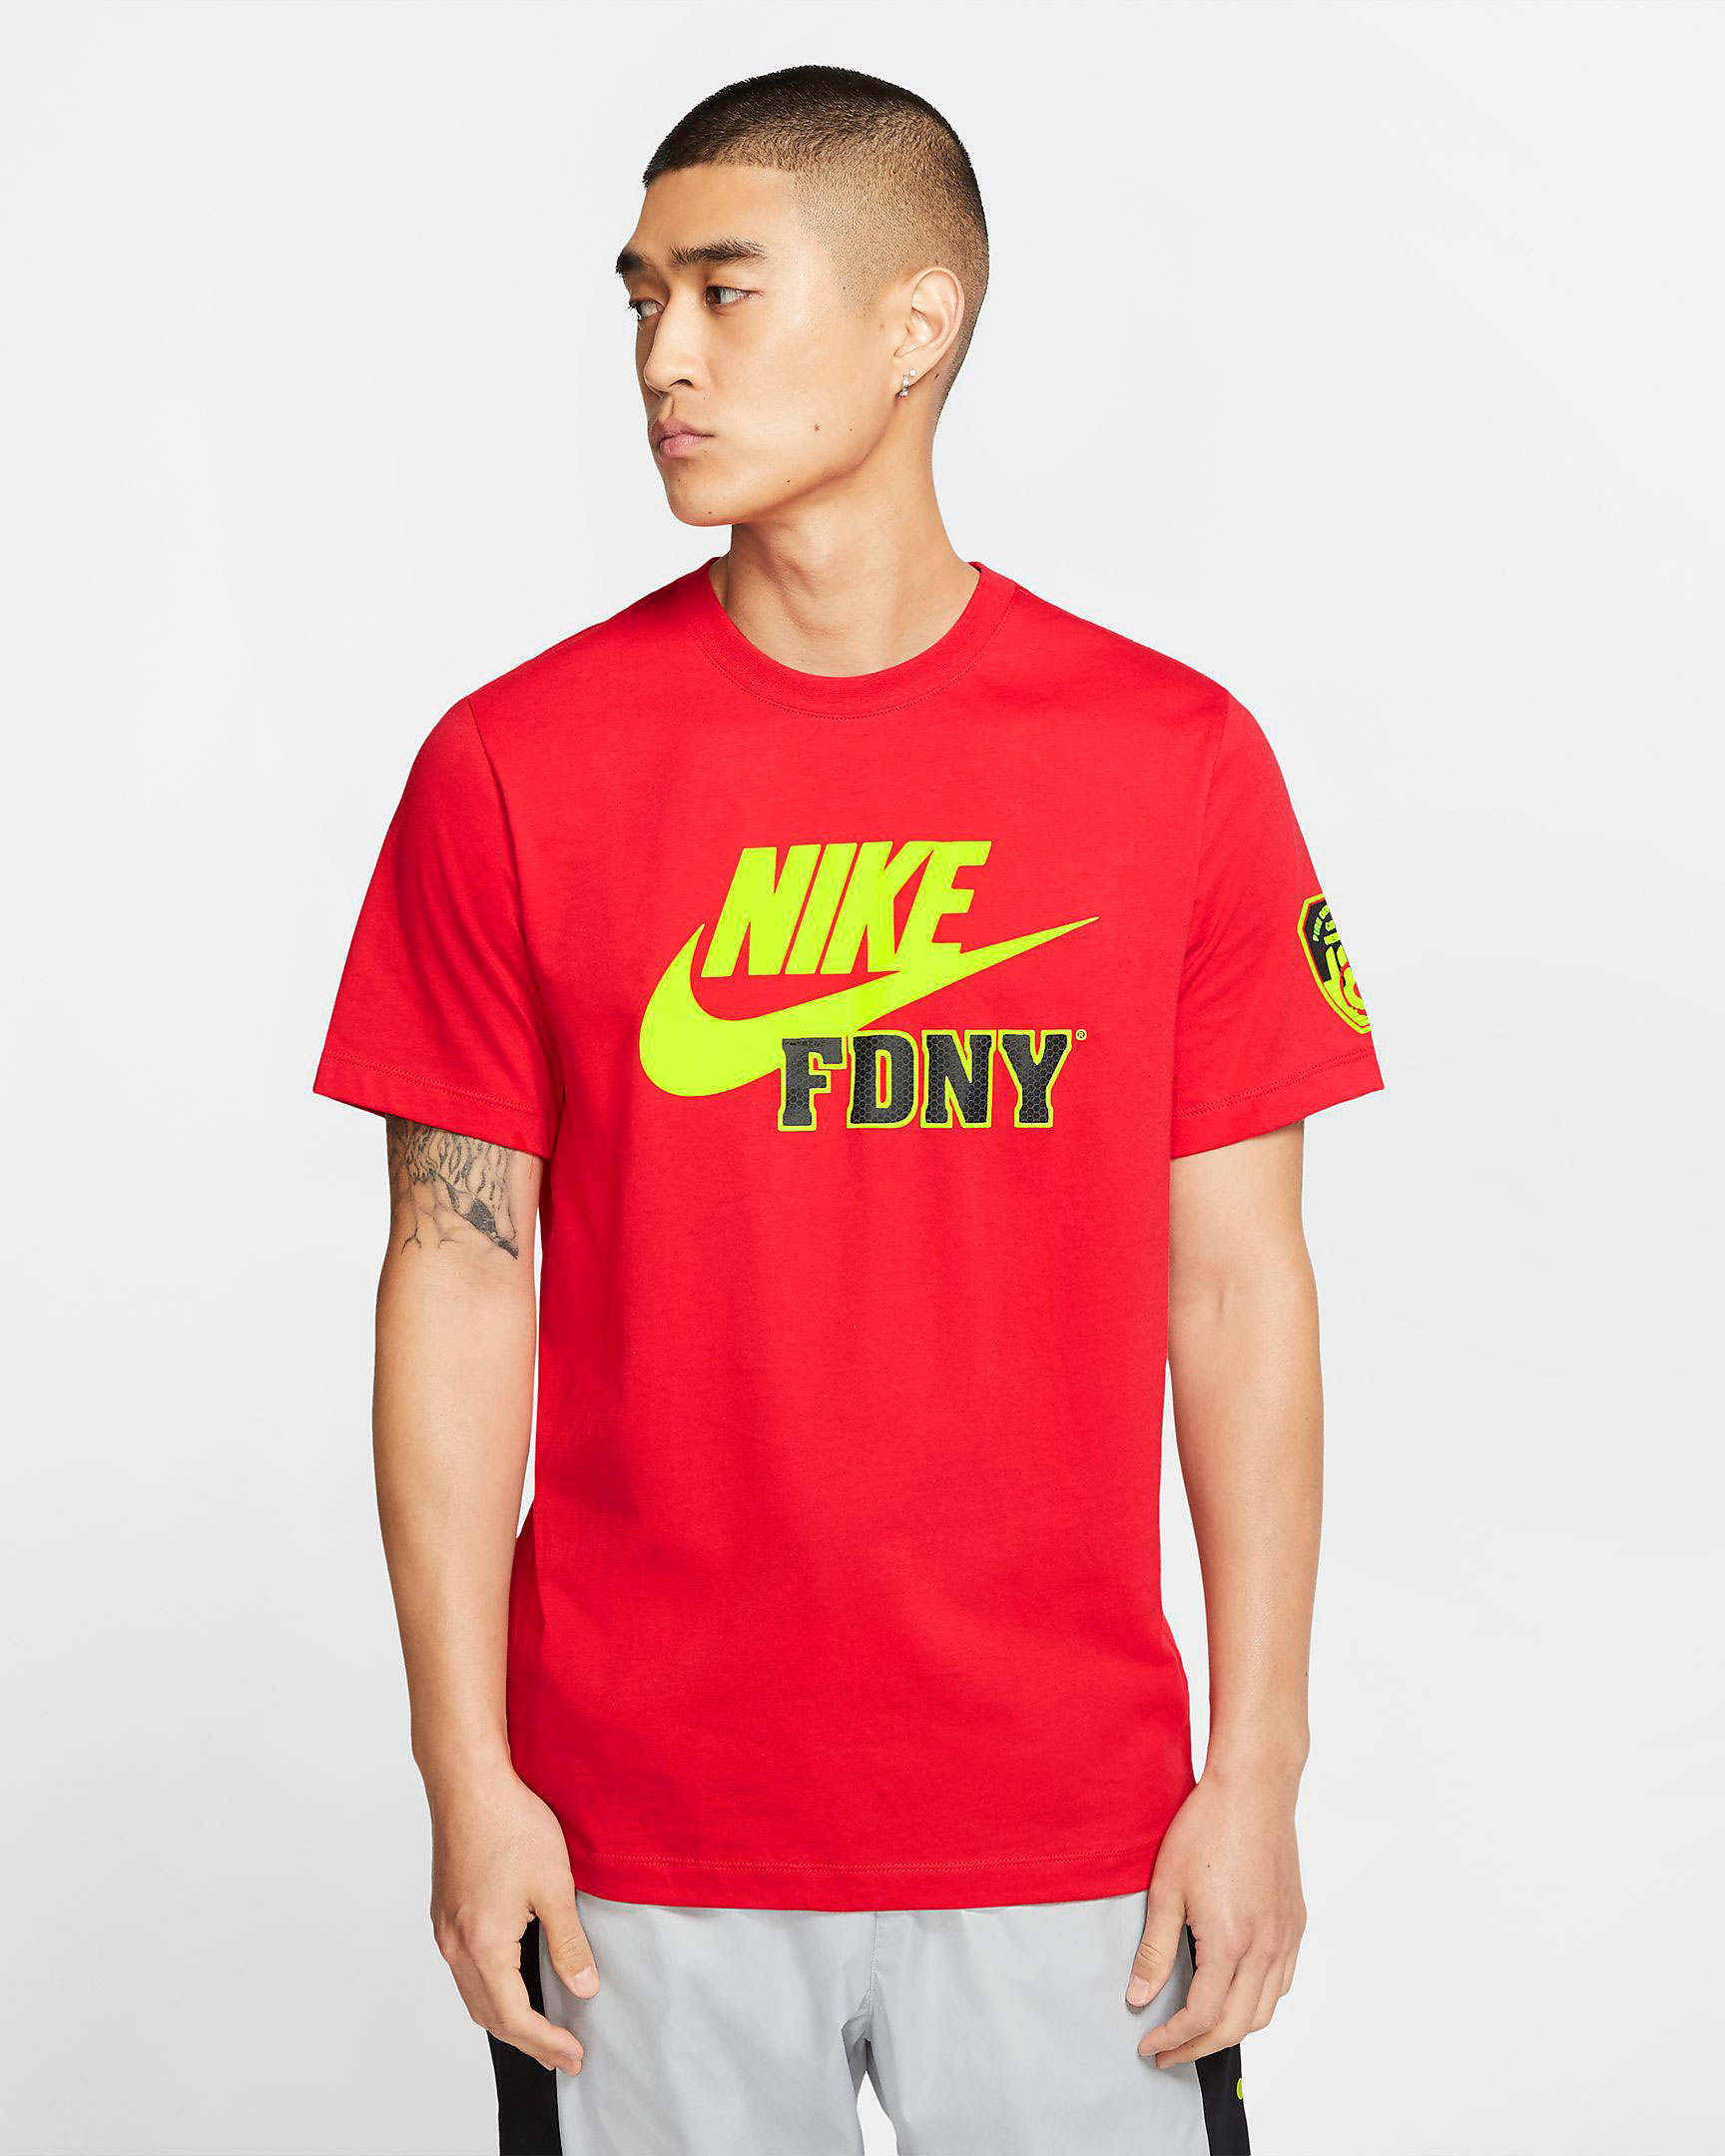 Nike Air Max 90 City Pack FDNY Clothing 